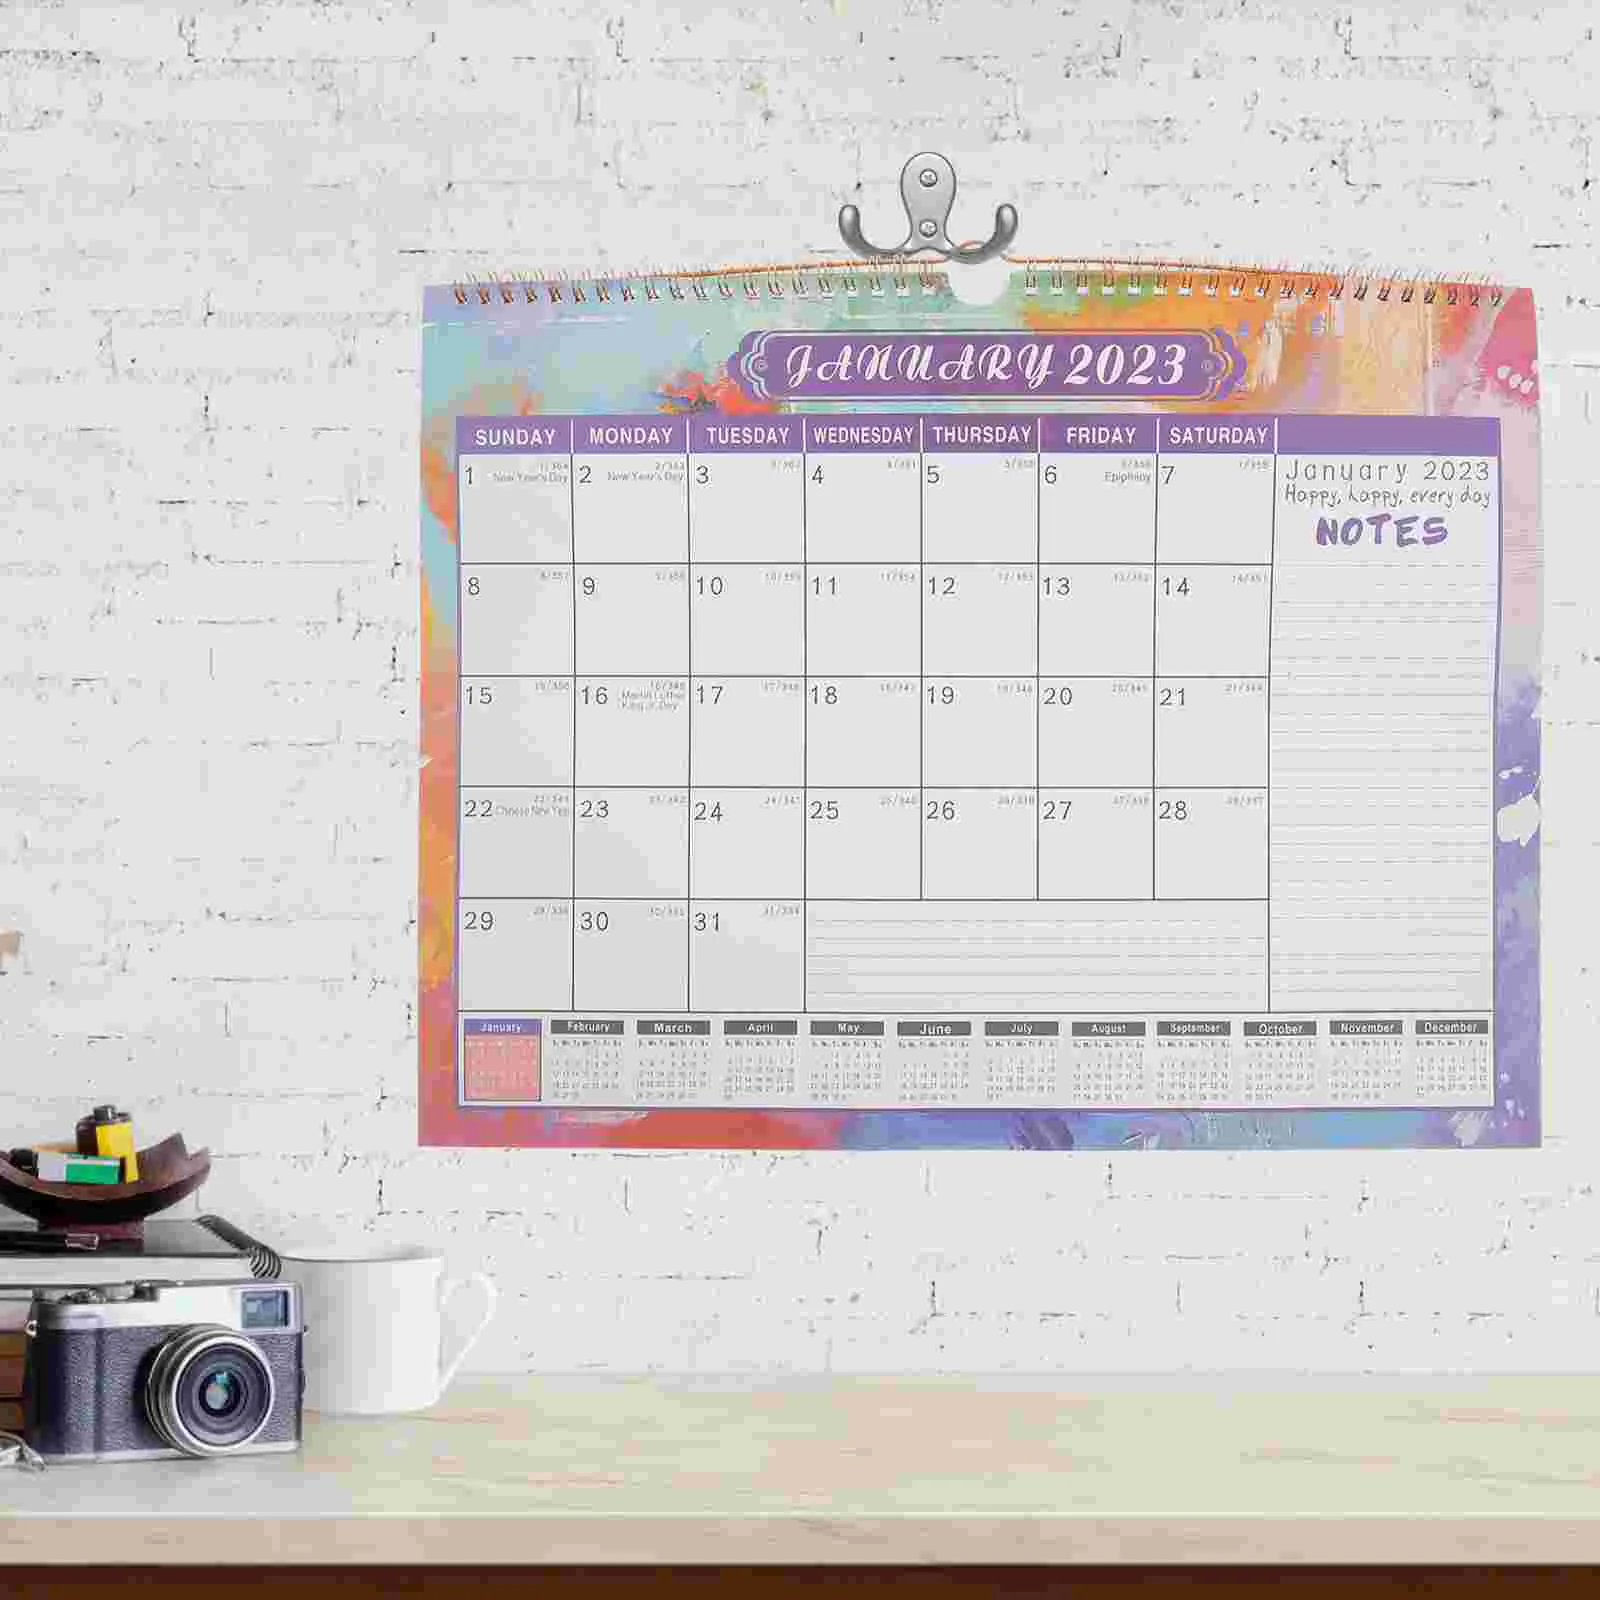 

Calendar Wall Planner Hanging 2023 Monthly Year Organizer Memo Planning Calendars Office Do List Note Journal Months Daily